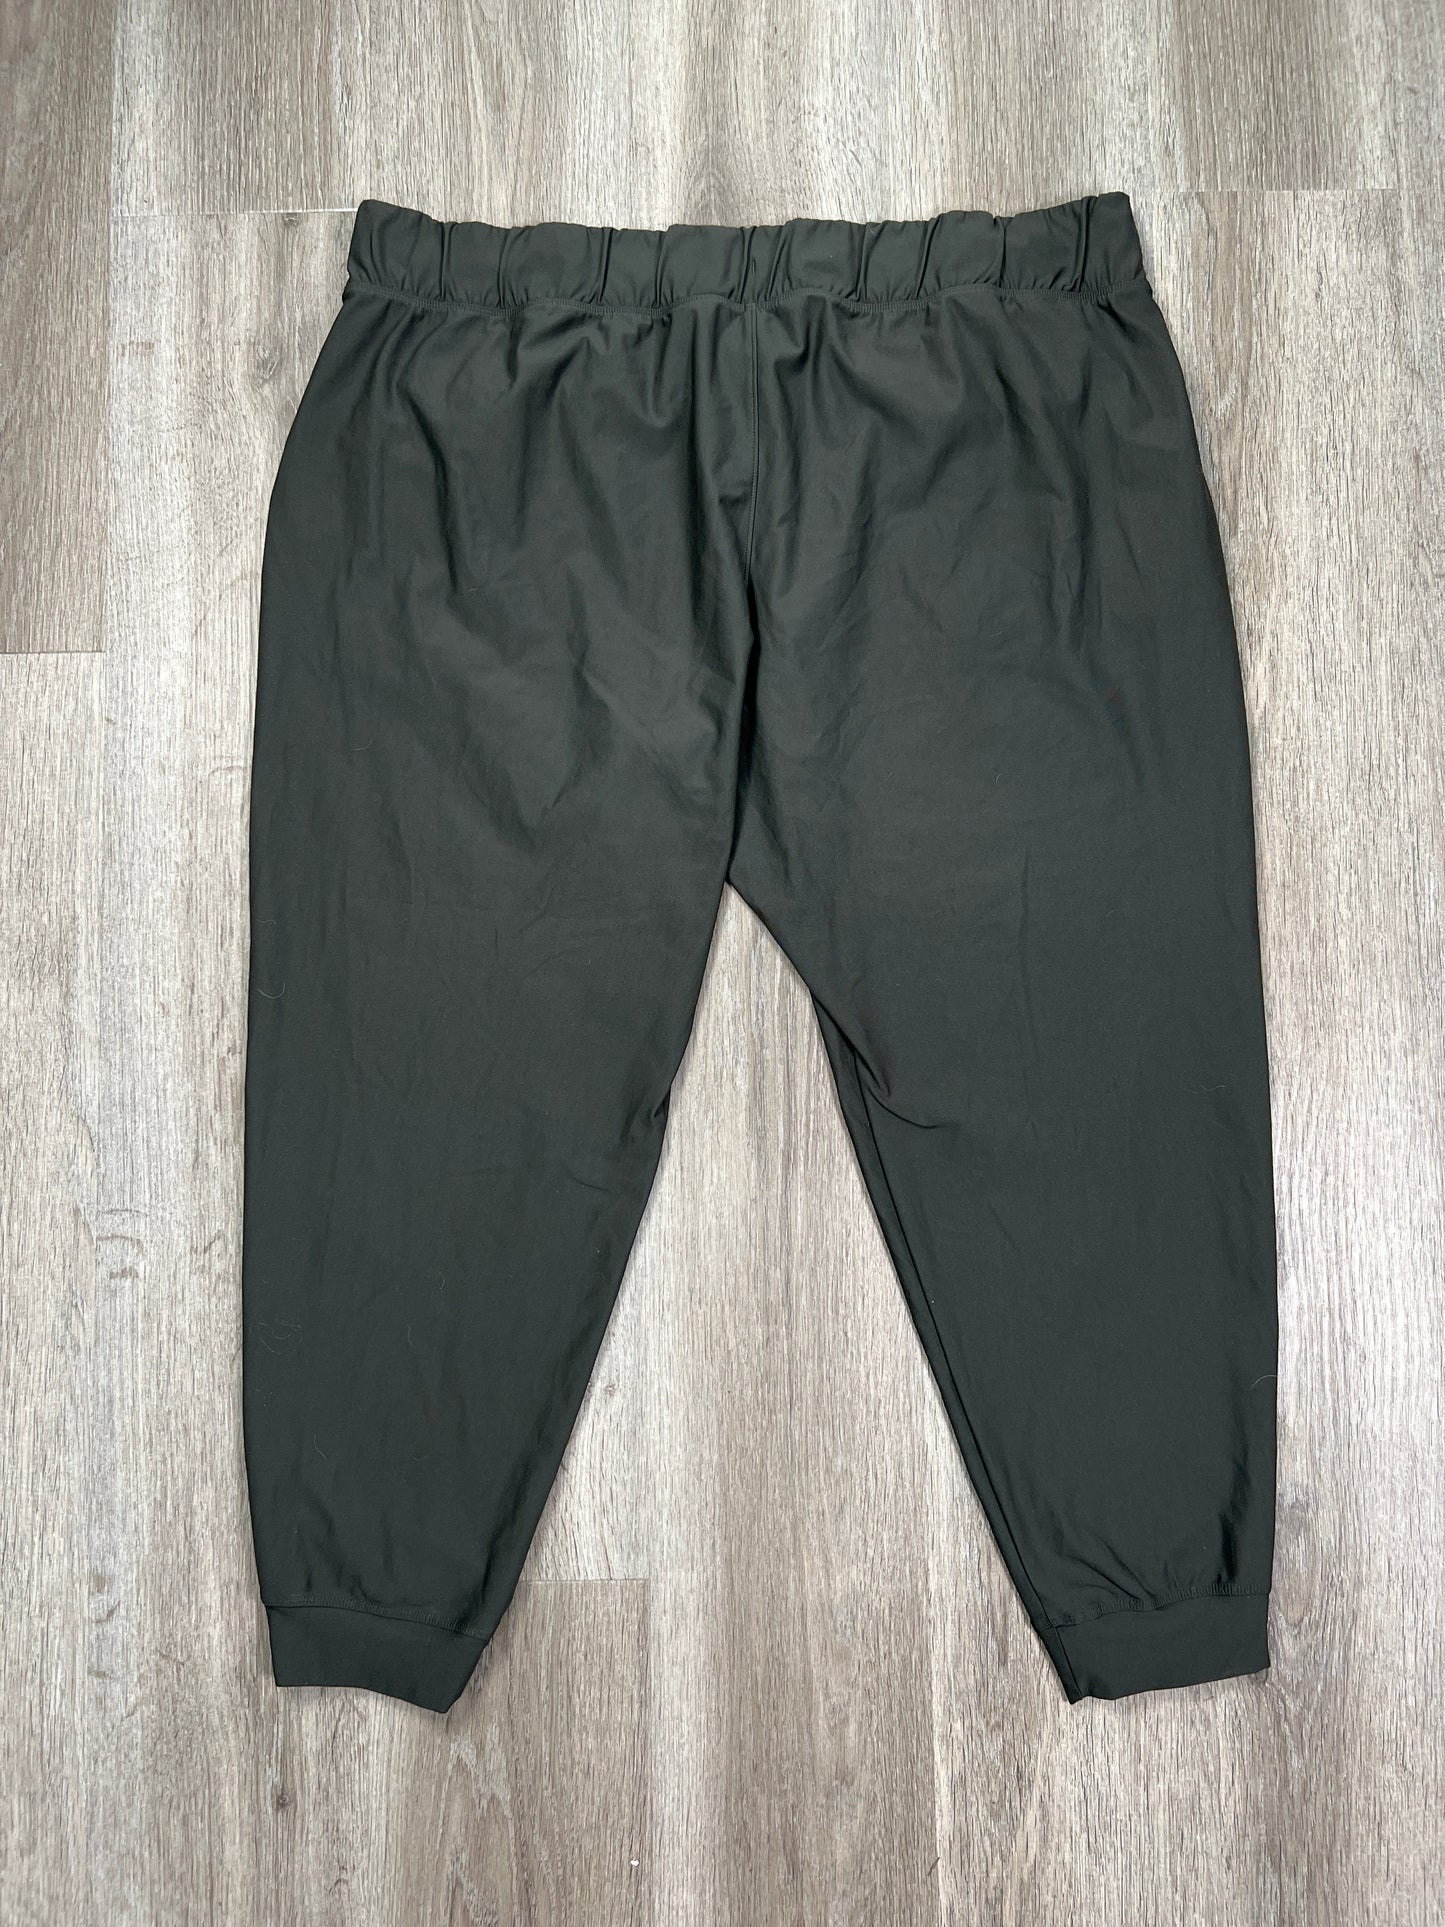 Green Athletic Pants Under Armour, Size 1x